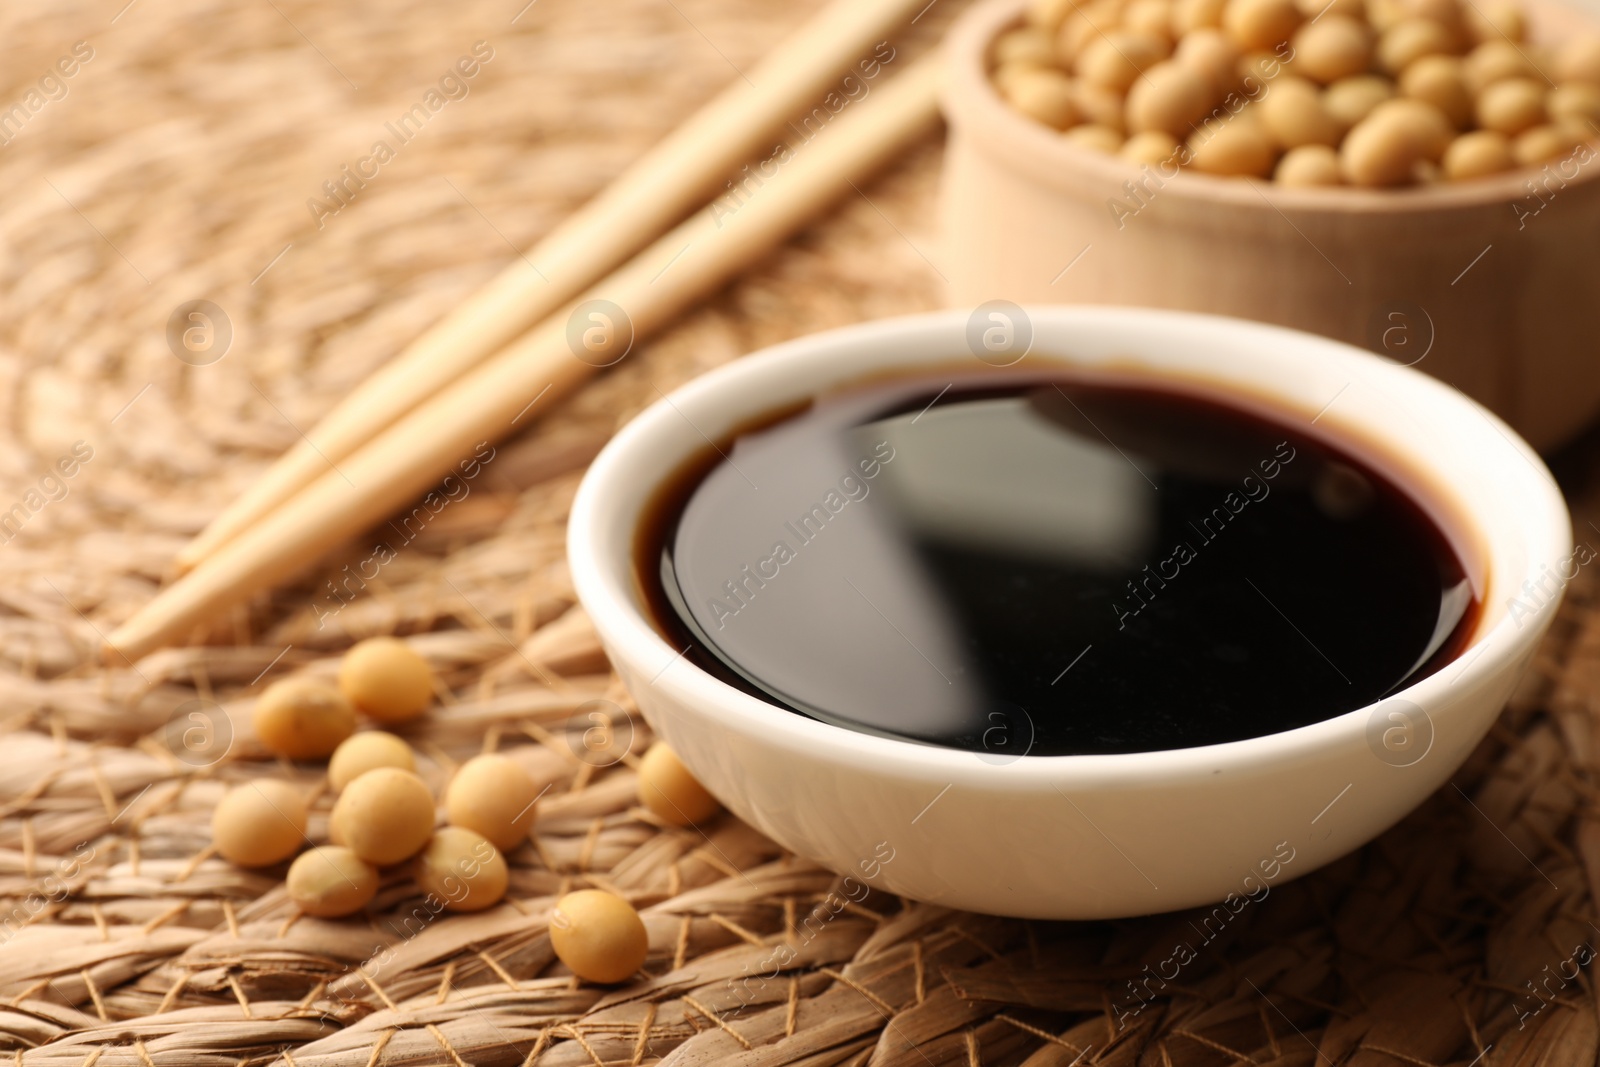 Photo of Soy sauce in bowl and soybeans on wicker mat, closeup